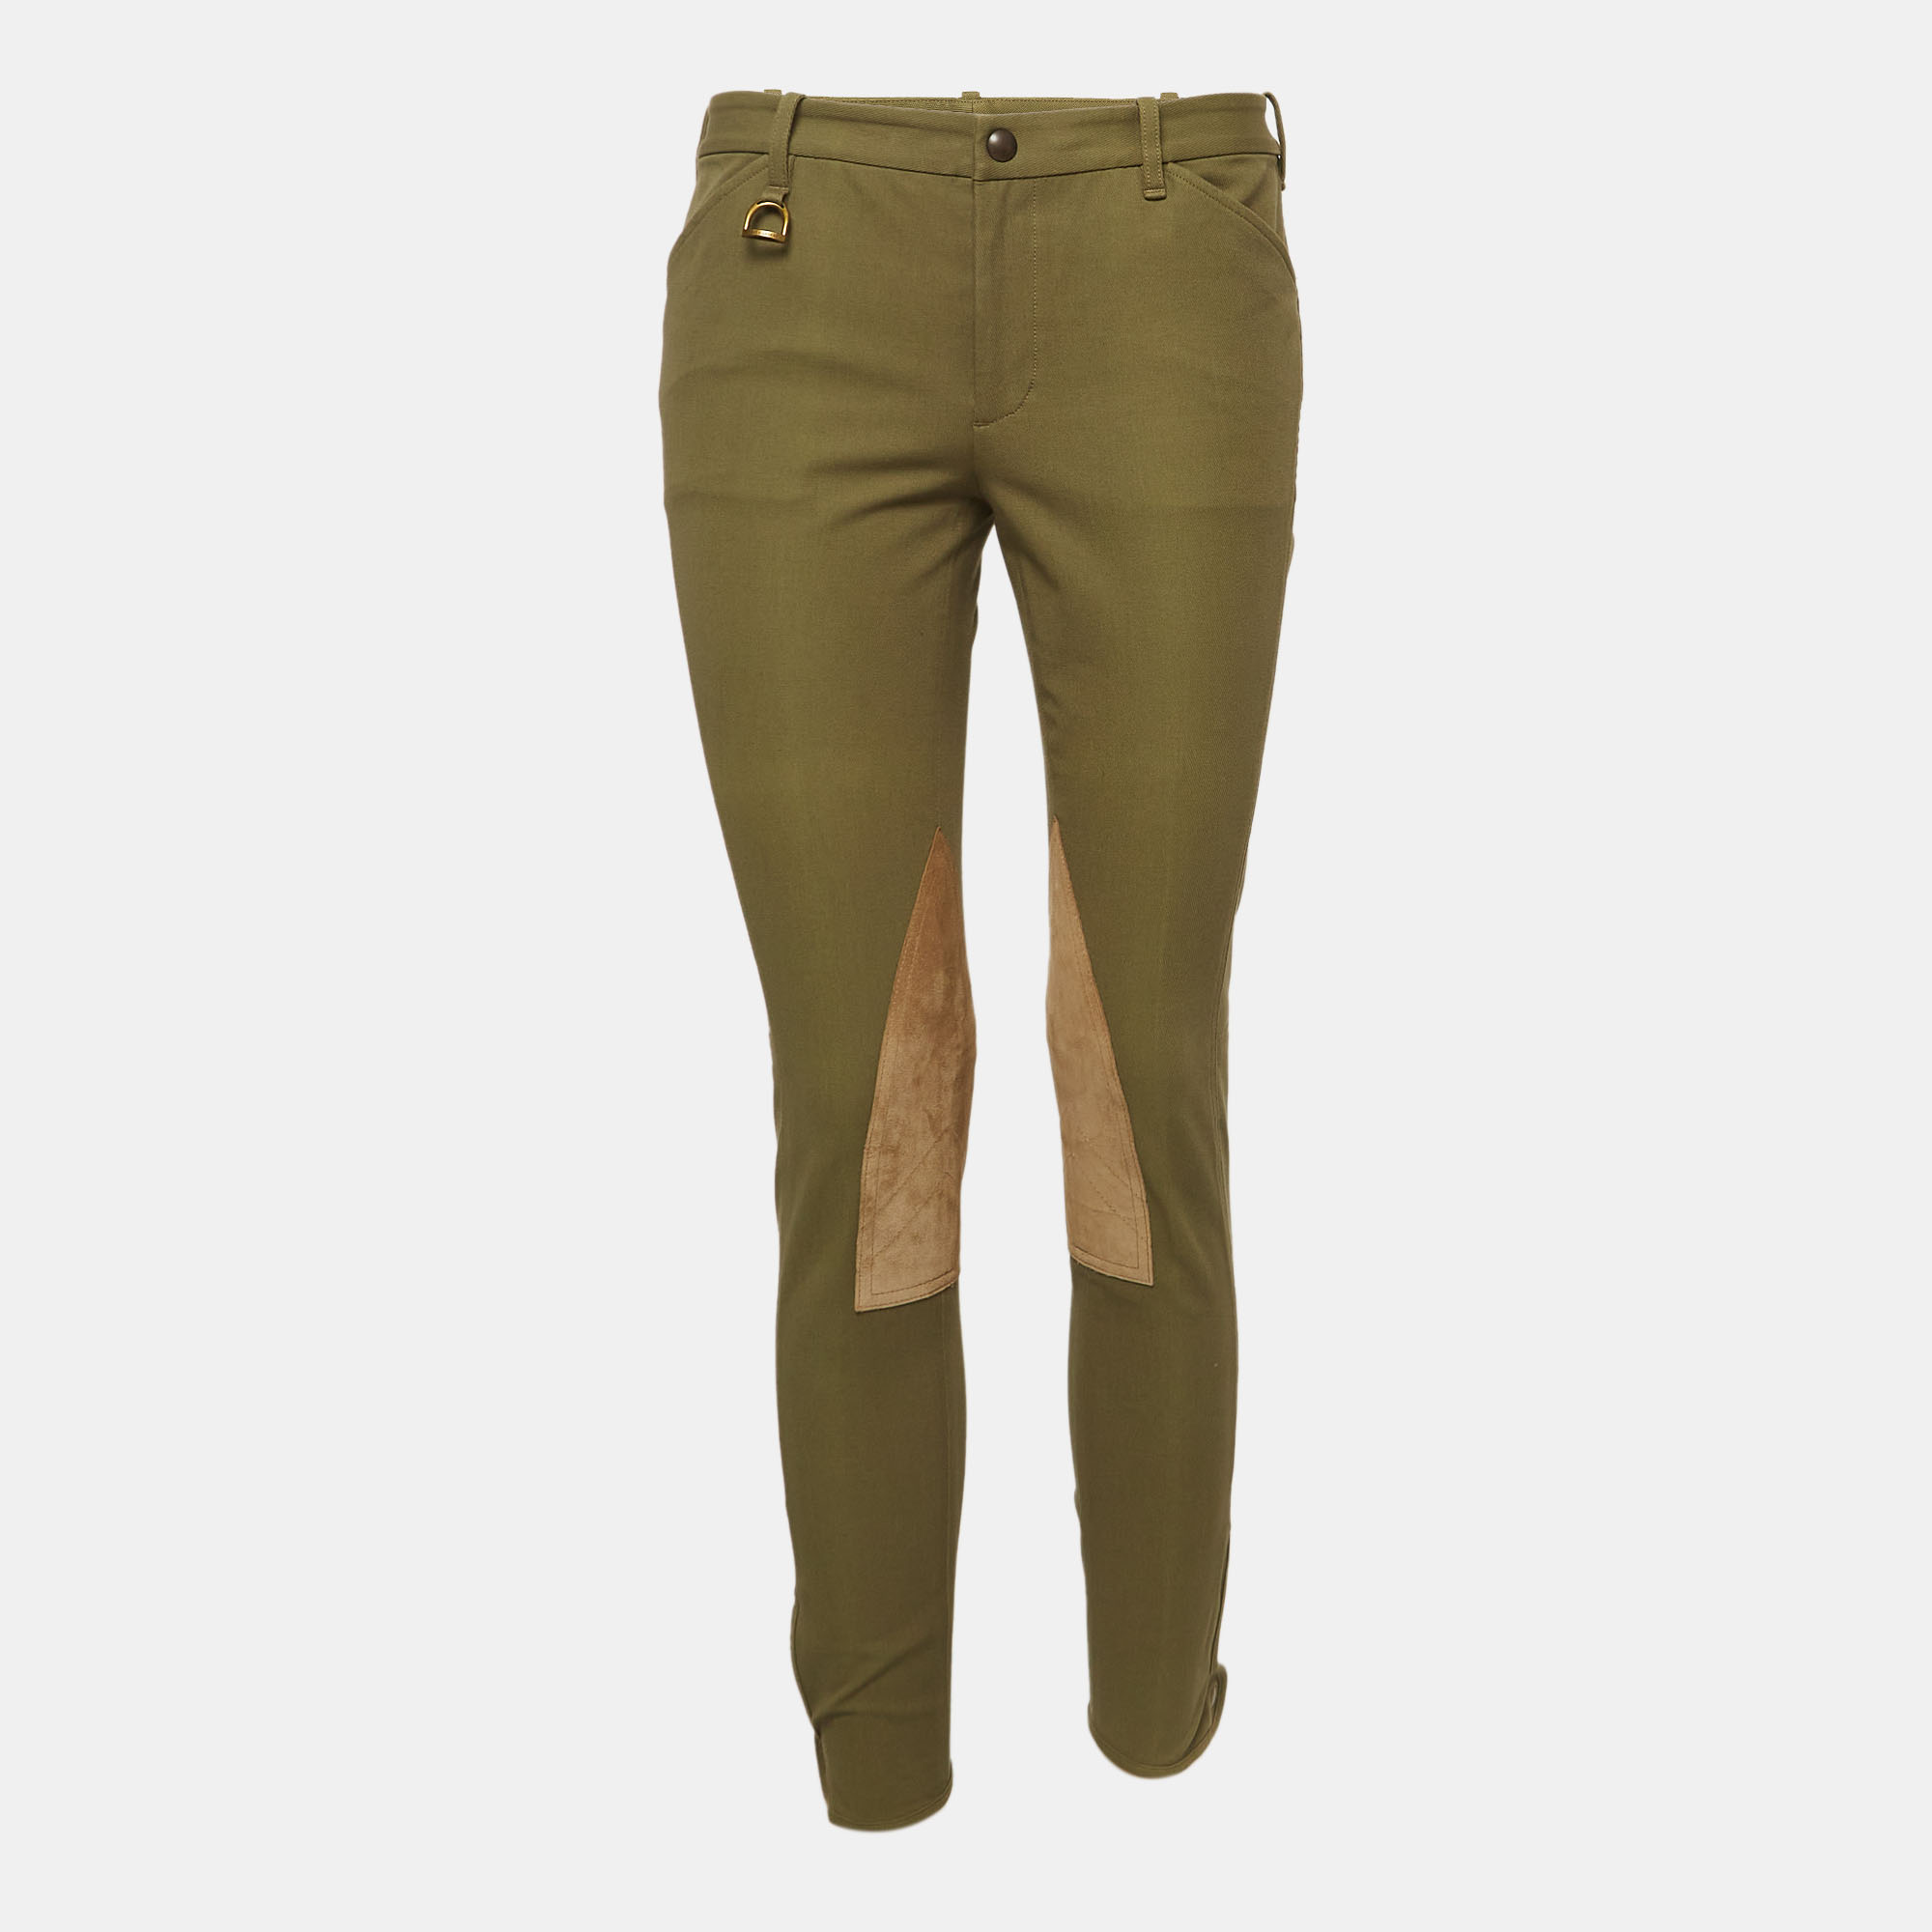 Pre-owned Ralph Lauren Green Suede Trim Cotton Twill Breeches Pants M